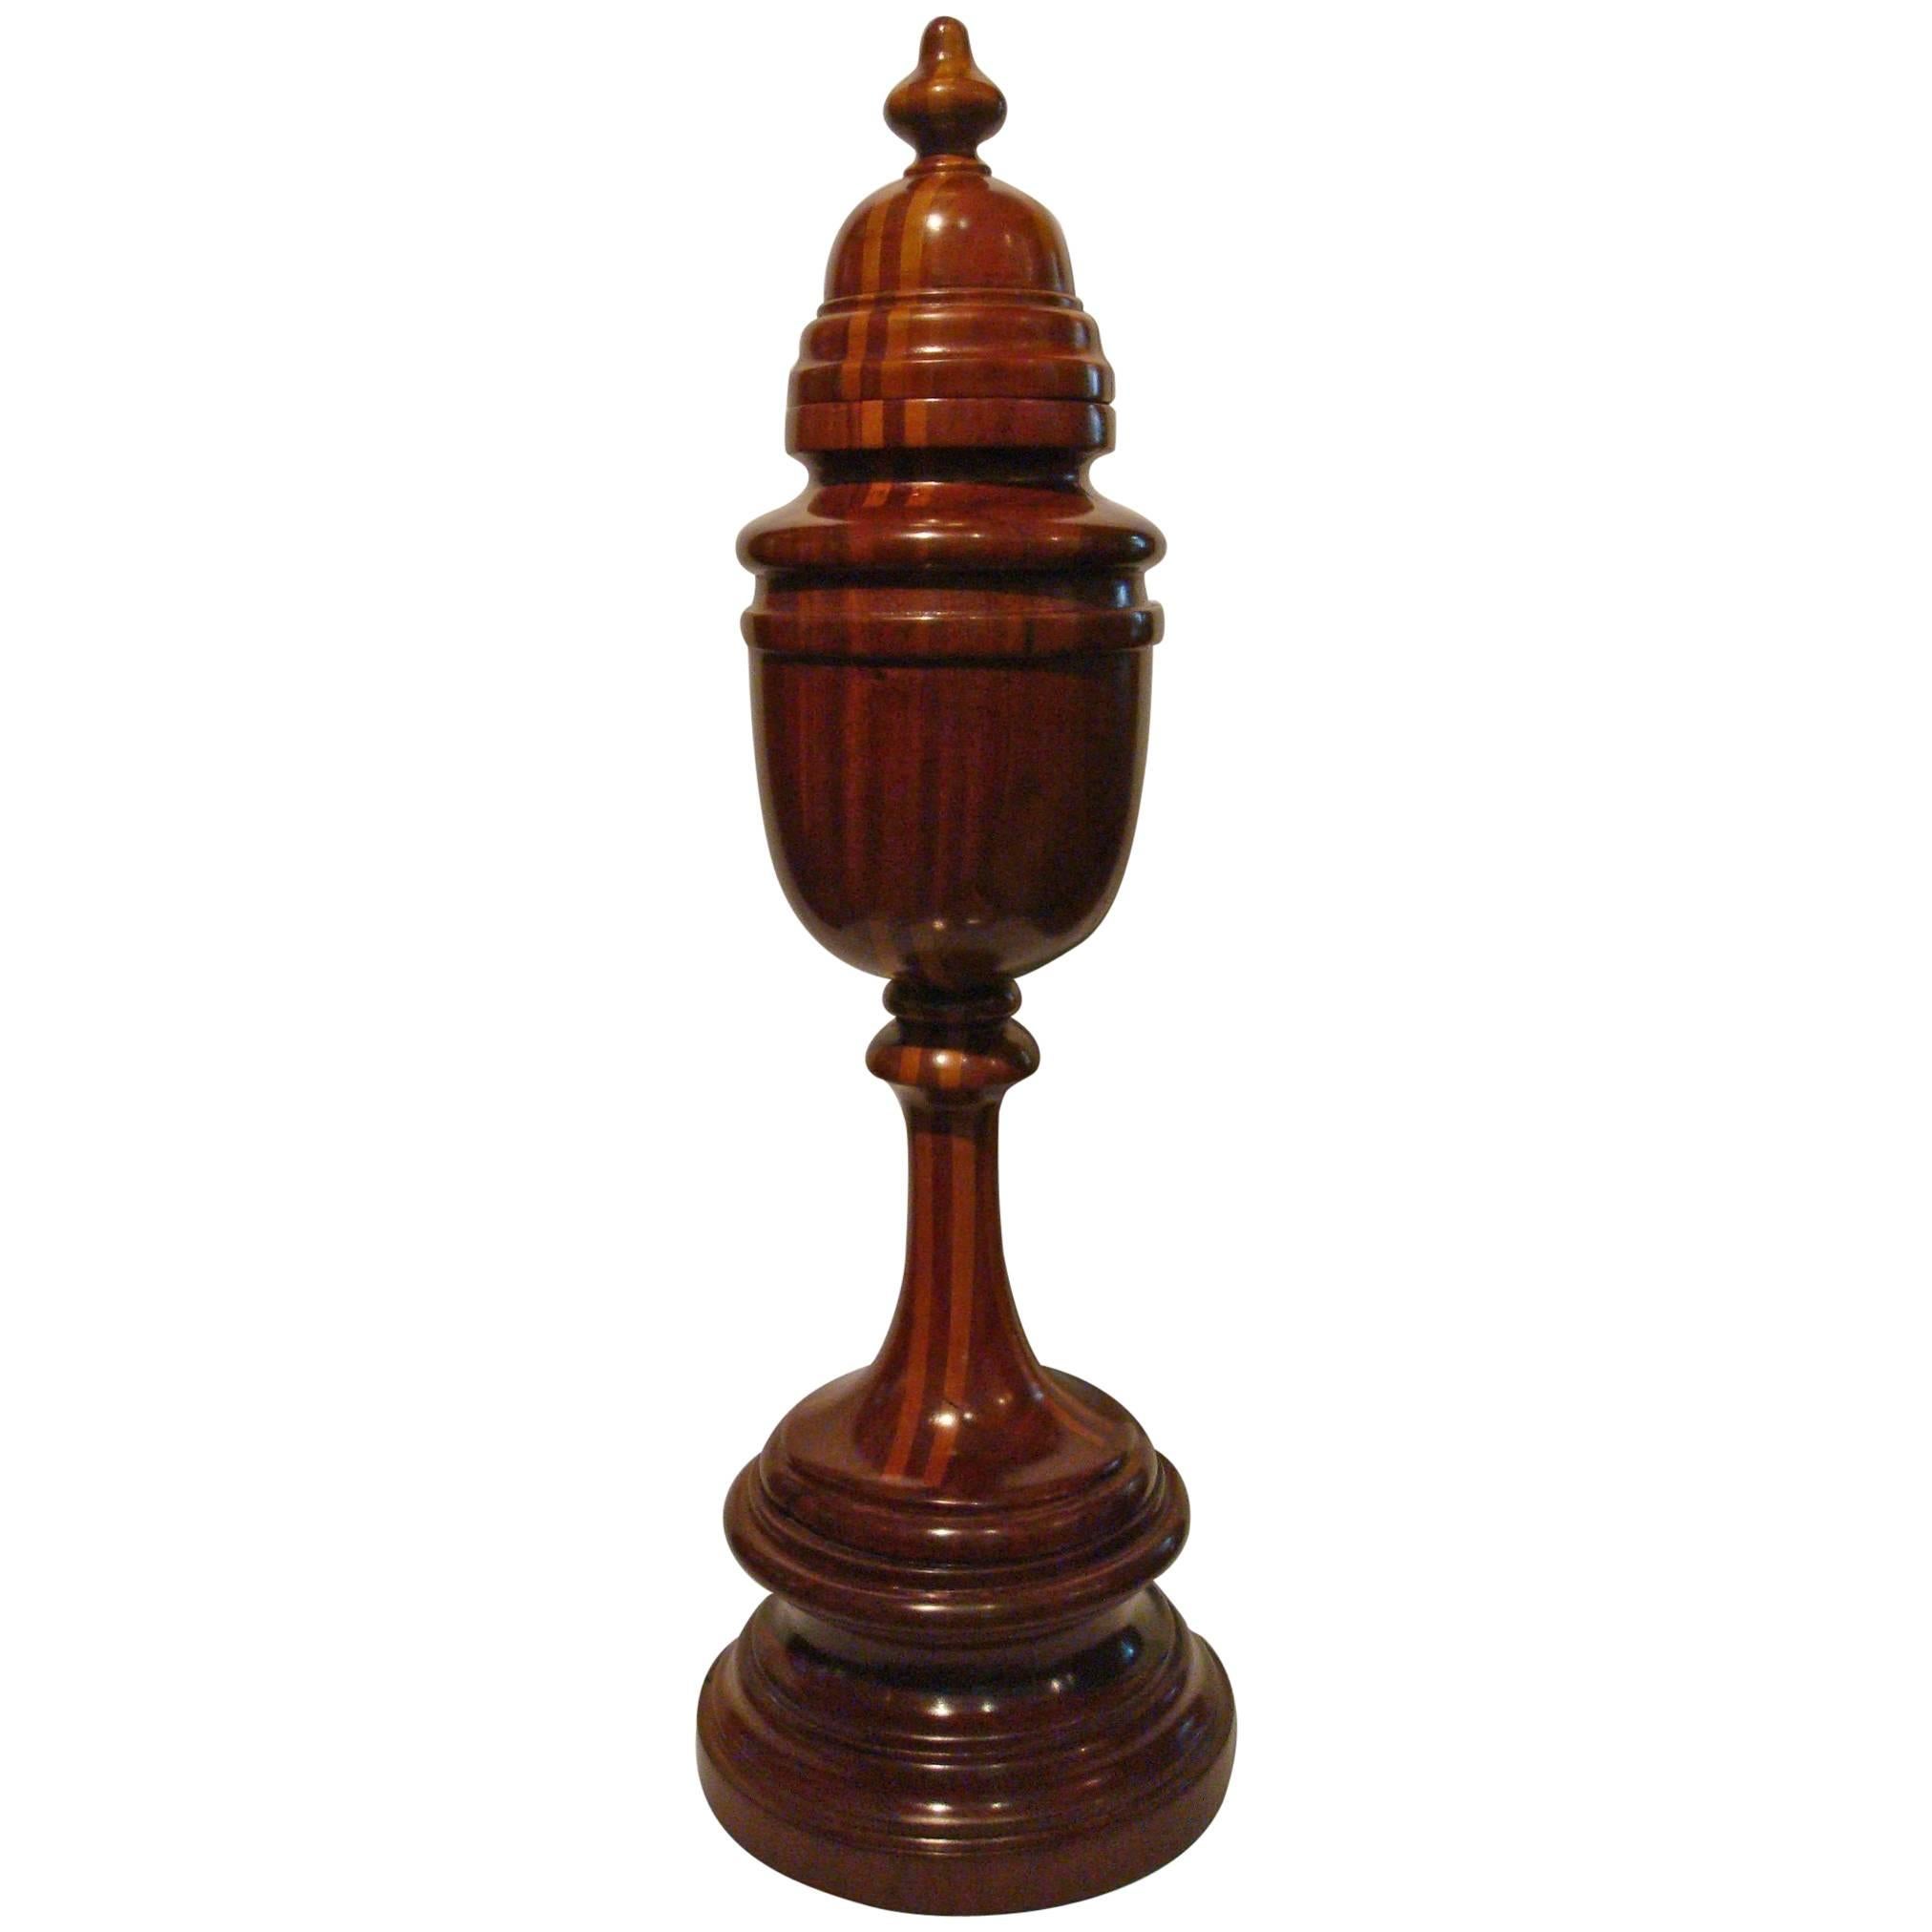 Giant Bishop Chess Piece Wooden For Sale